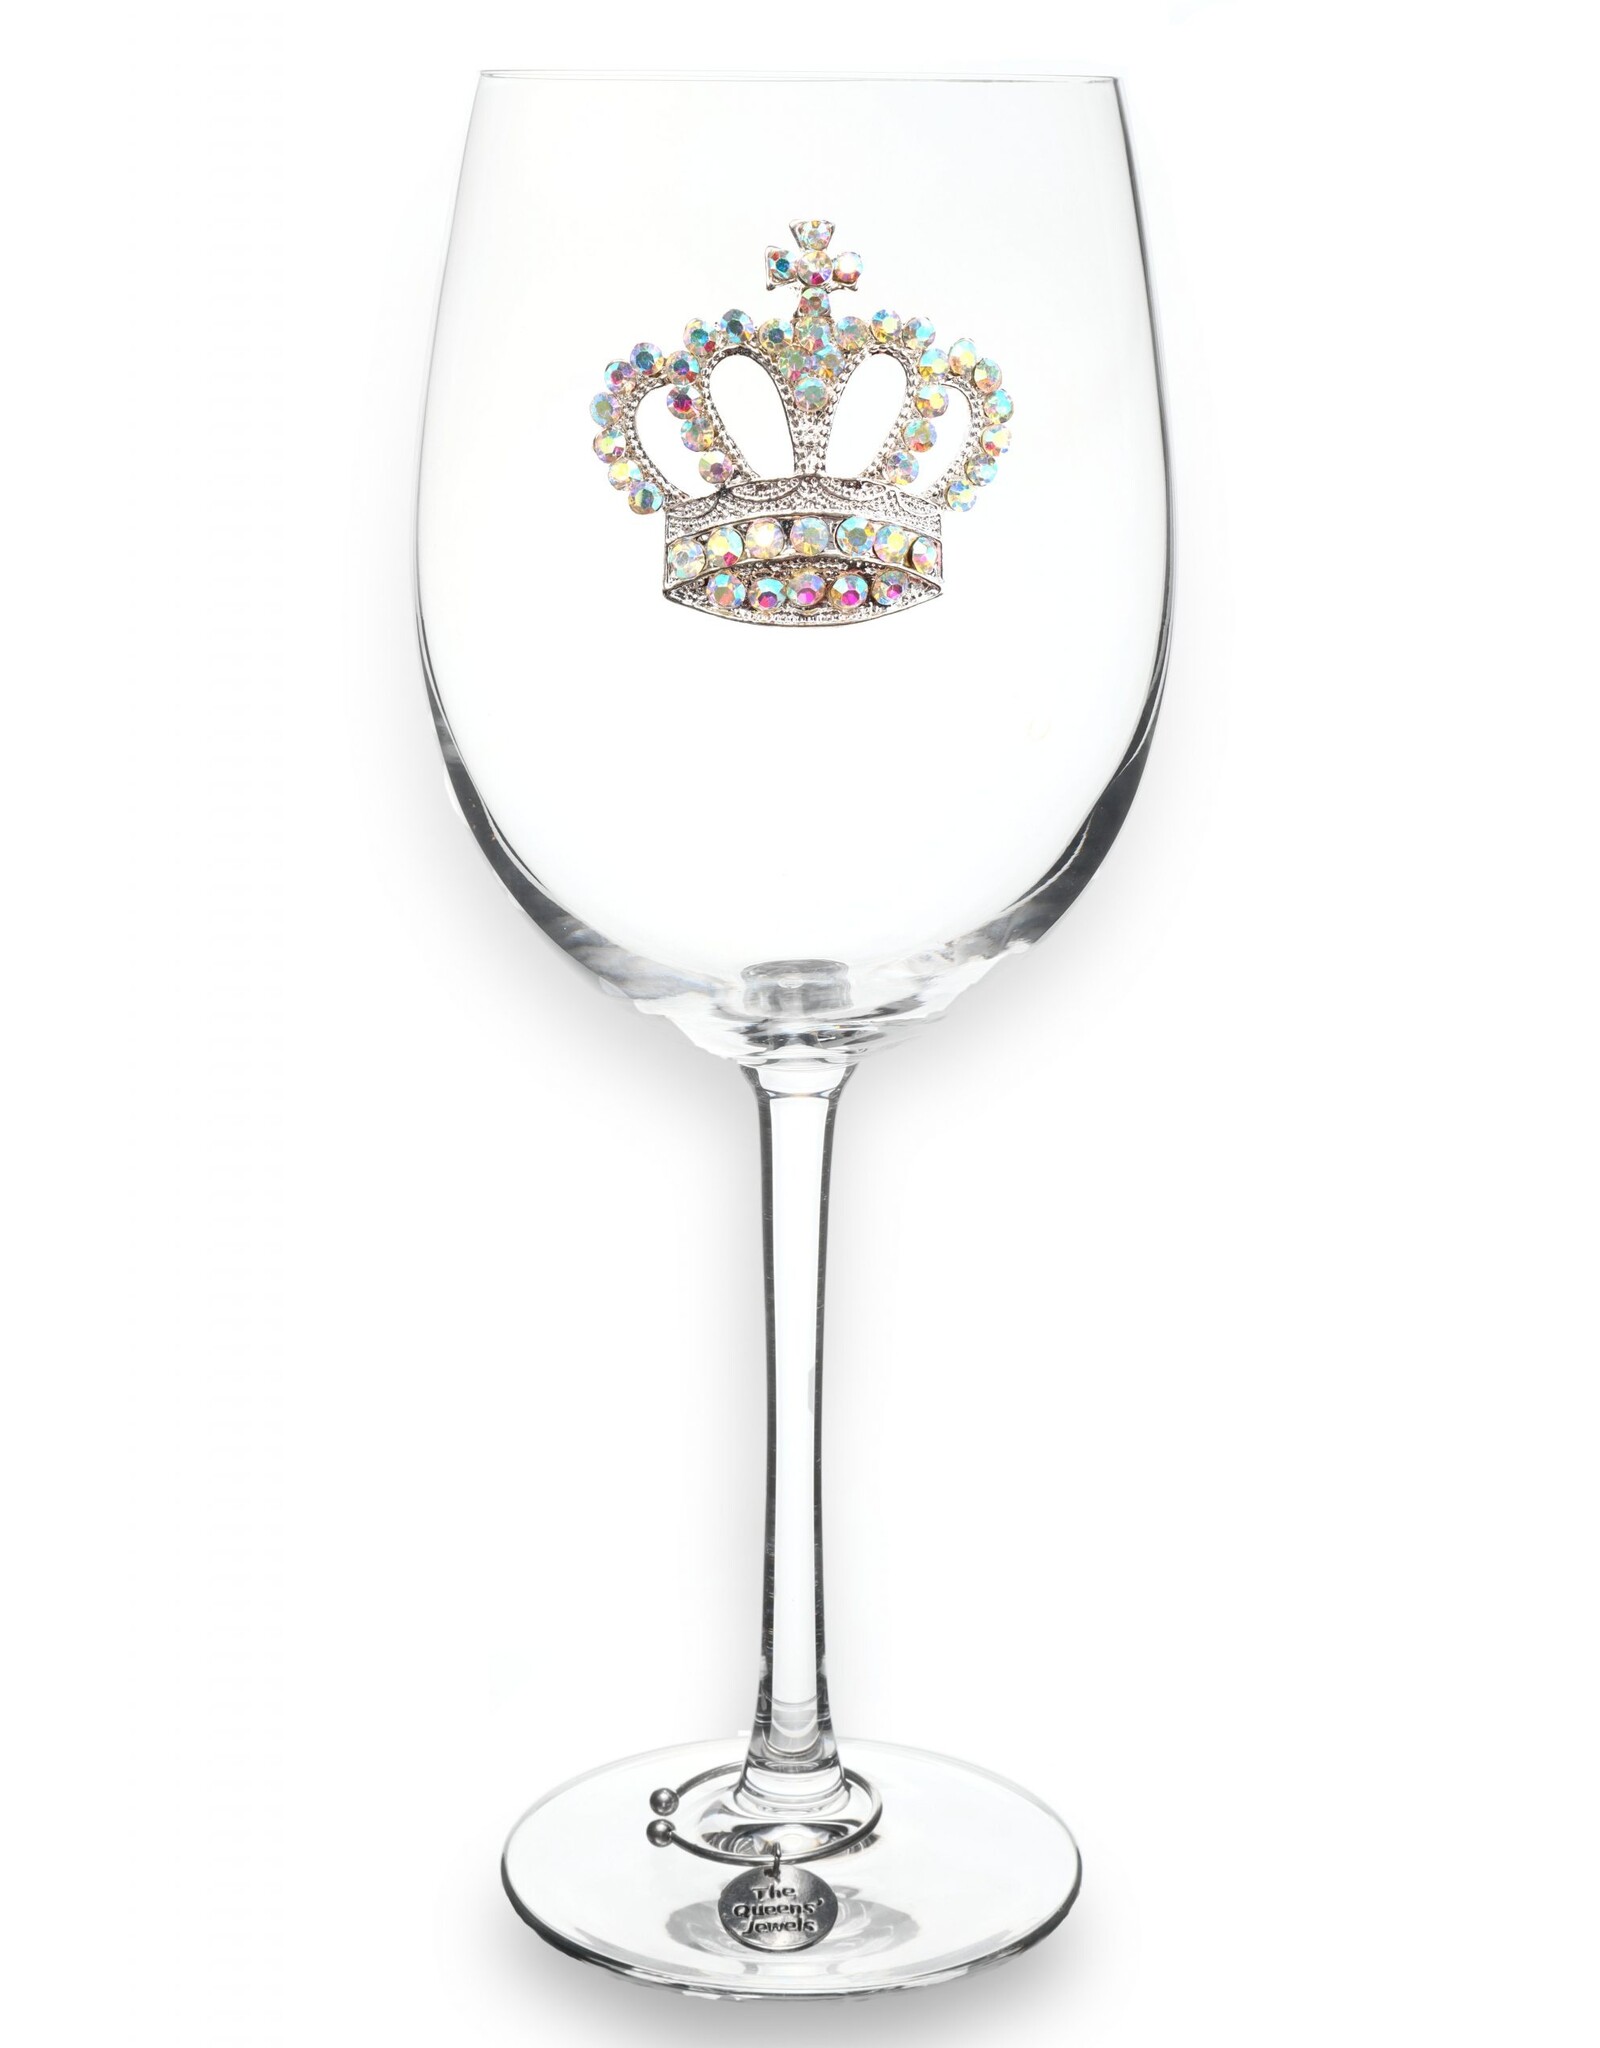 The Queen's Jewels Aurora Borealis Crown Jeweled Stemmed Wine Glass